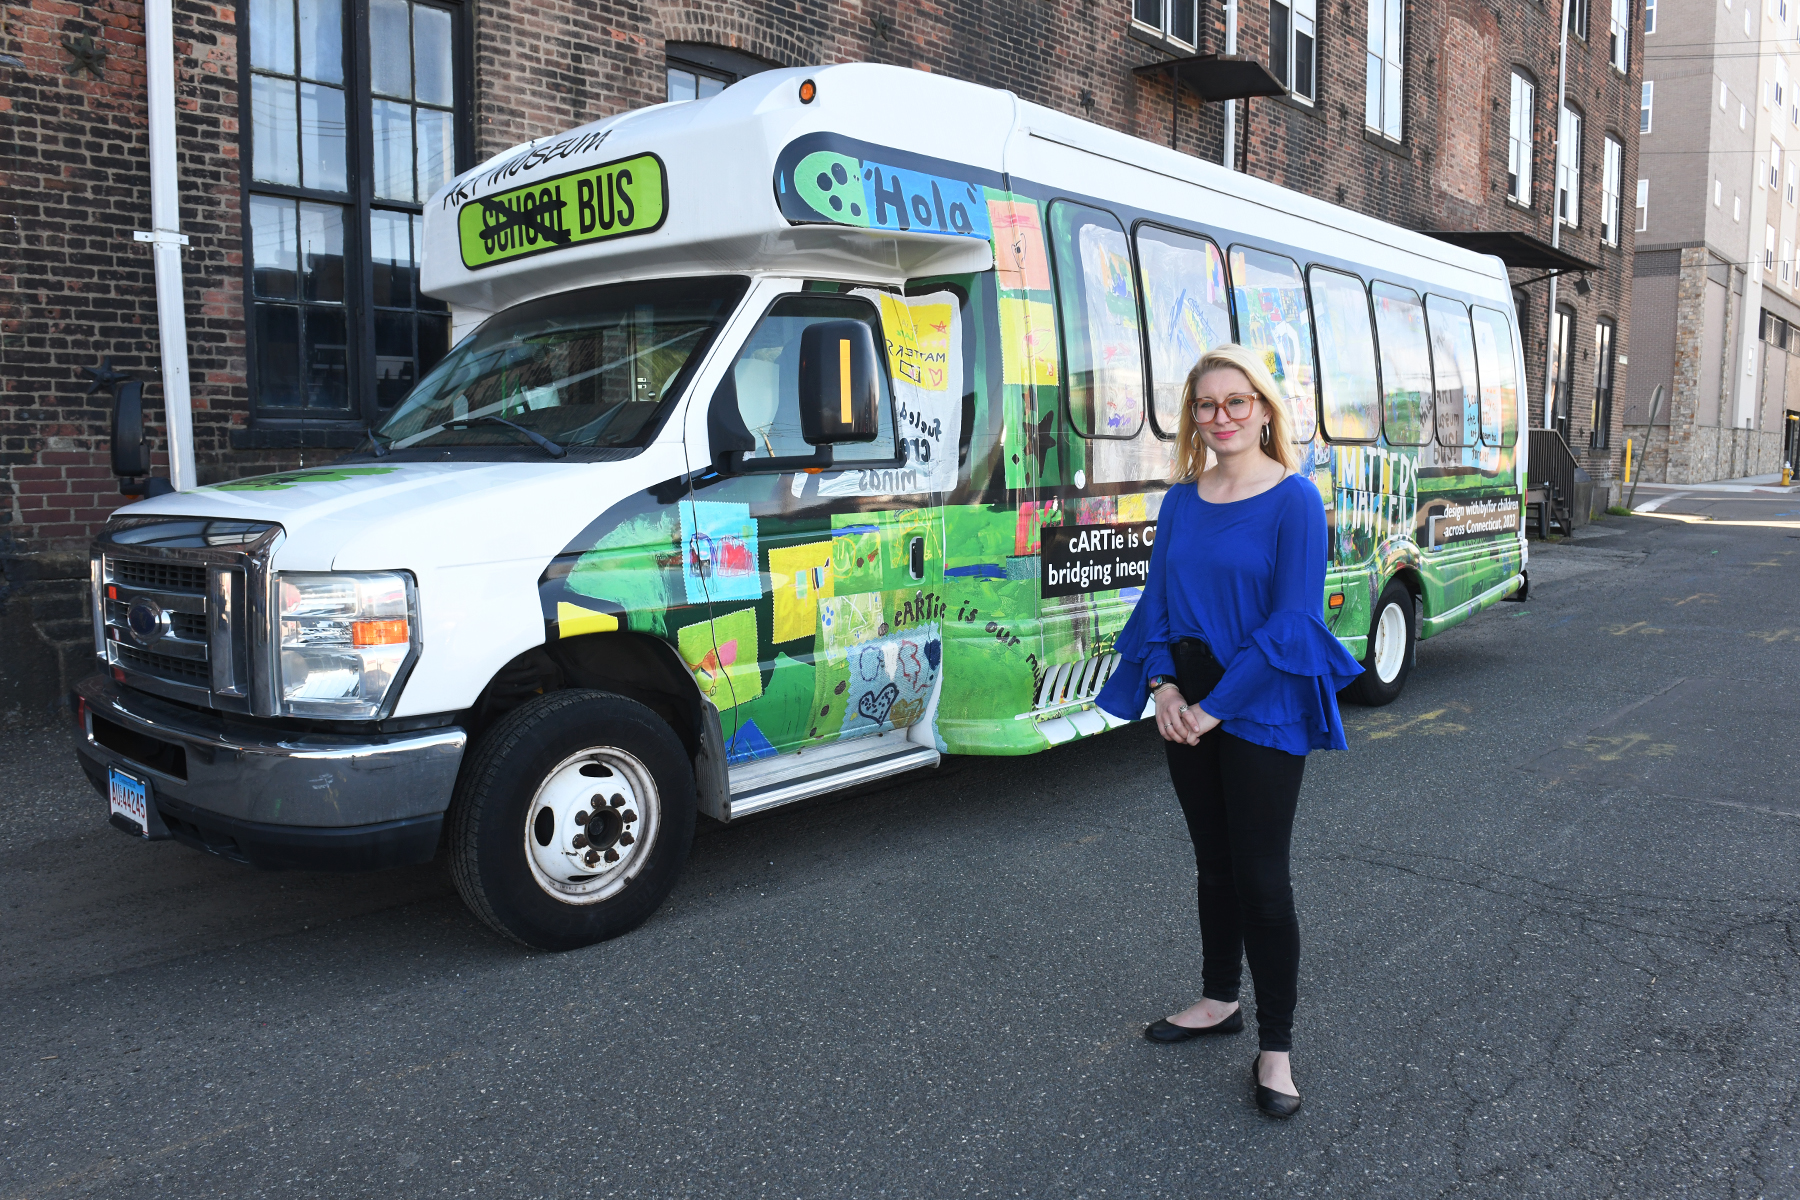 Shelton-based art bus hopes to spark creativity — ‘The goal is to reach every...